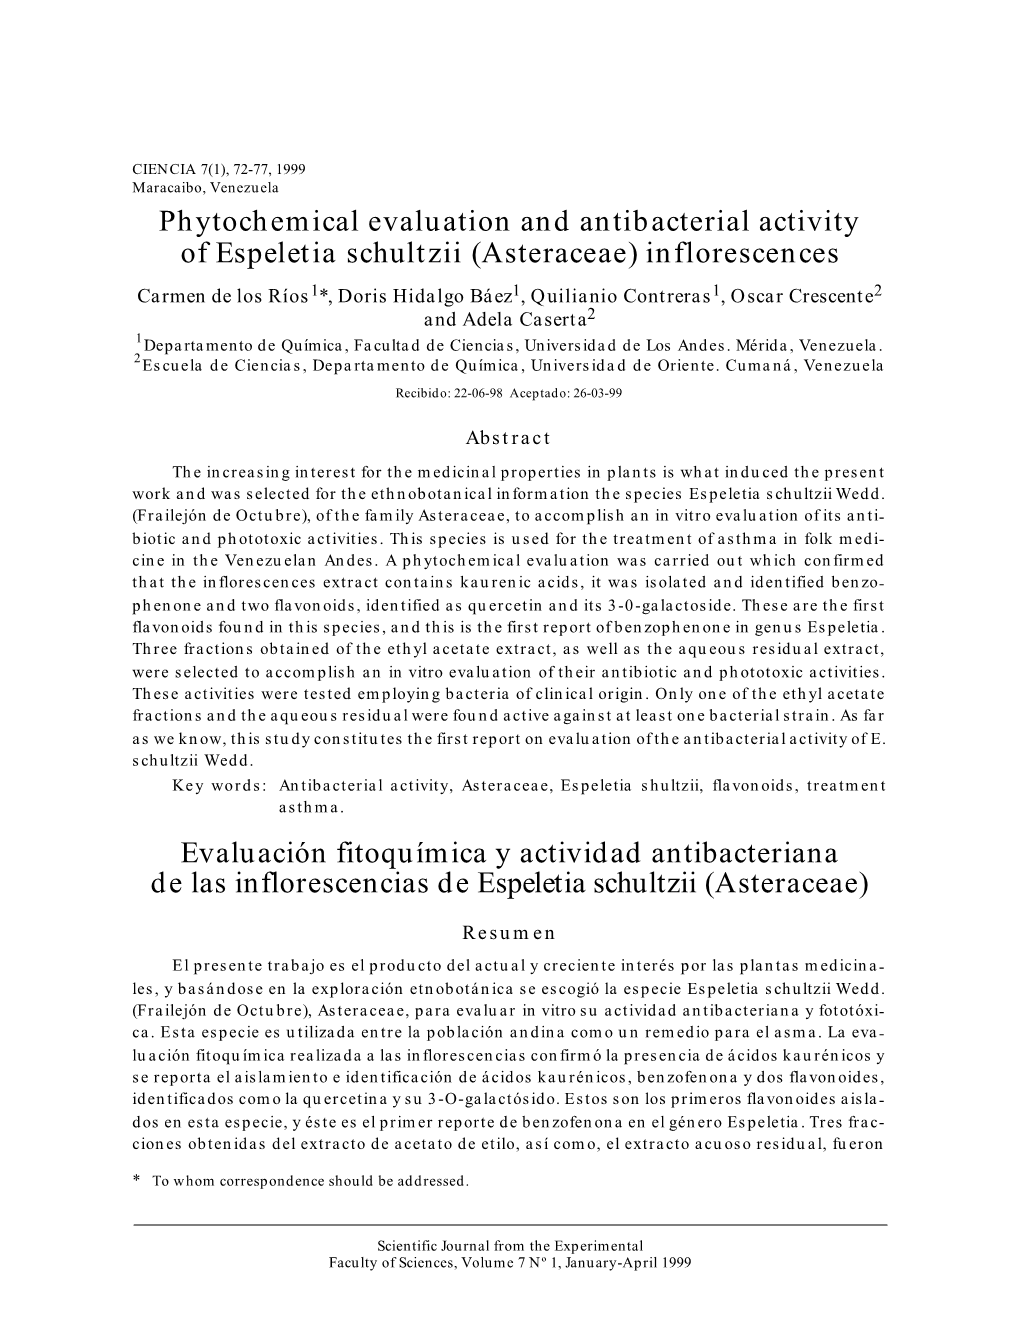 Phytochemical Evaluation and Antibacterial Activity of Espeletia